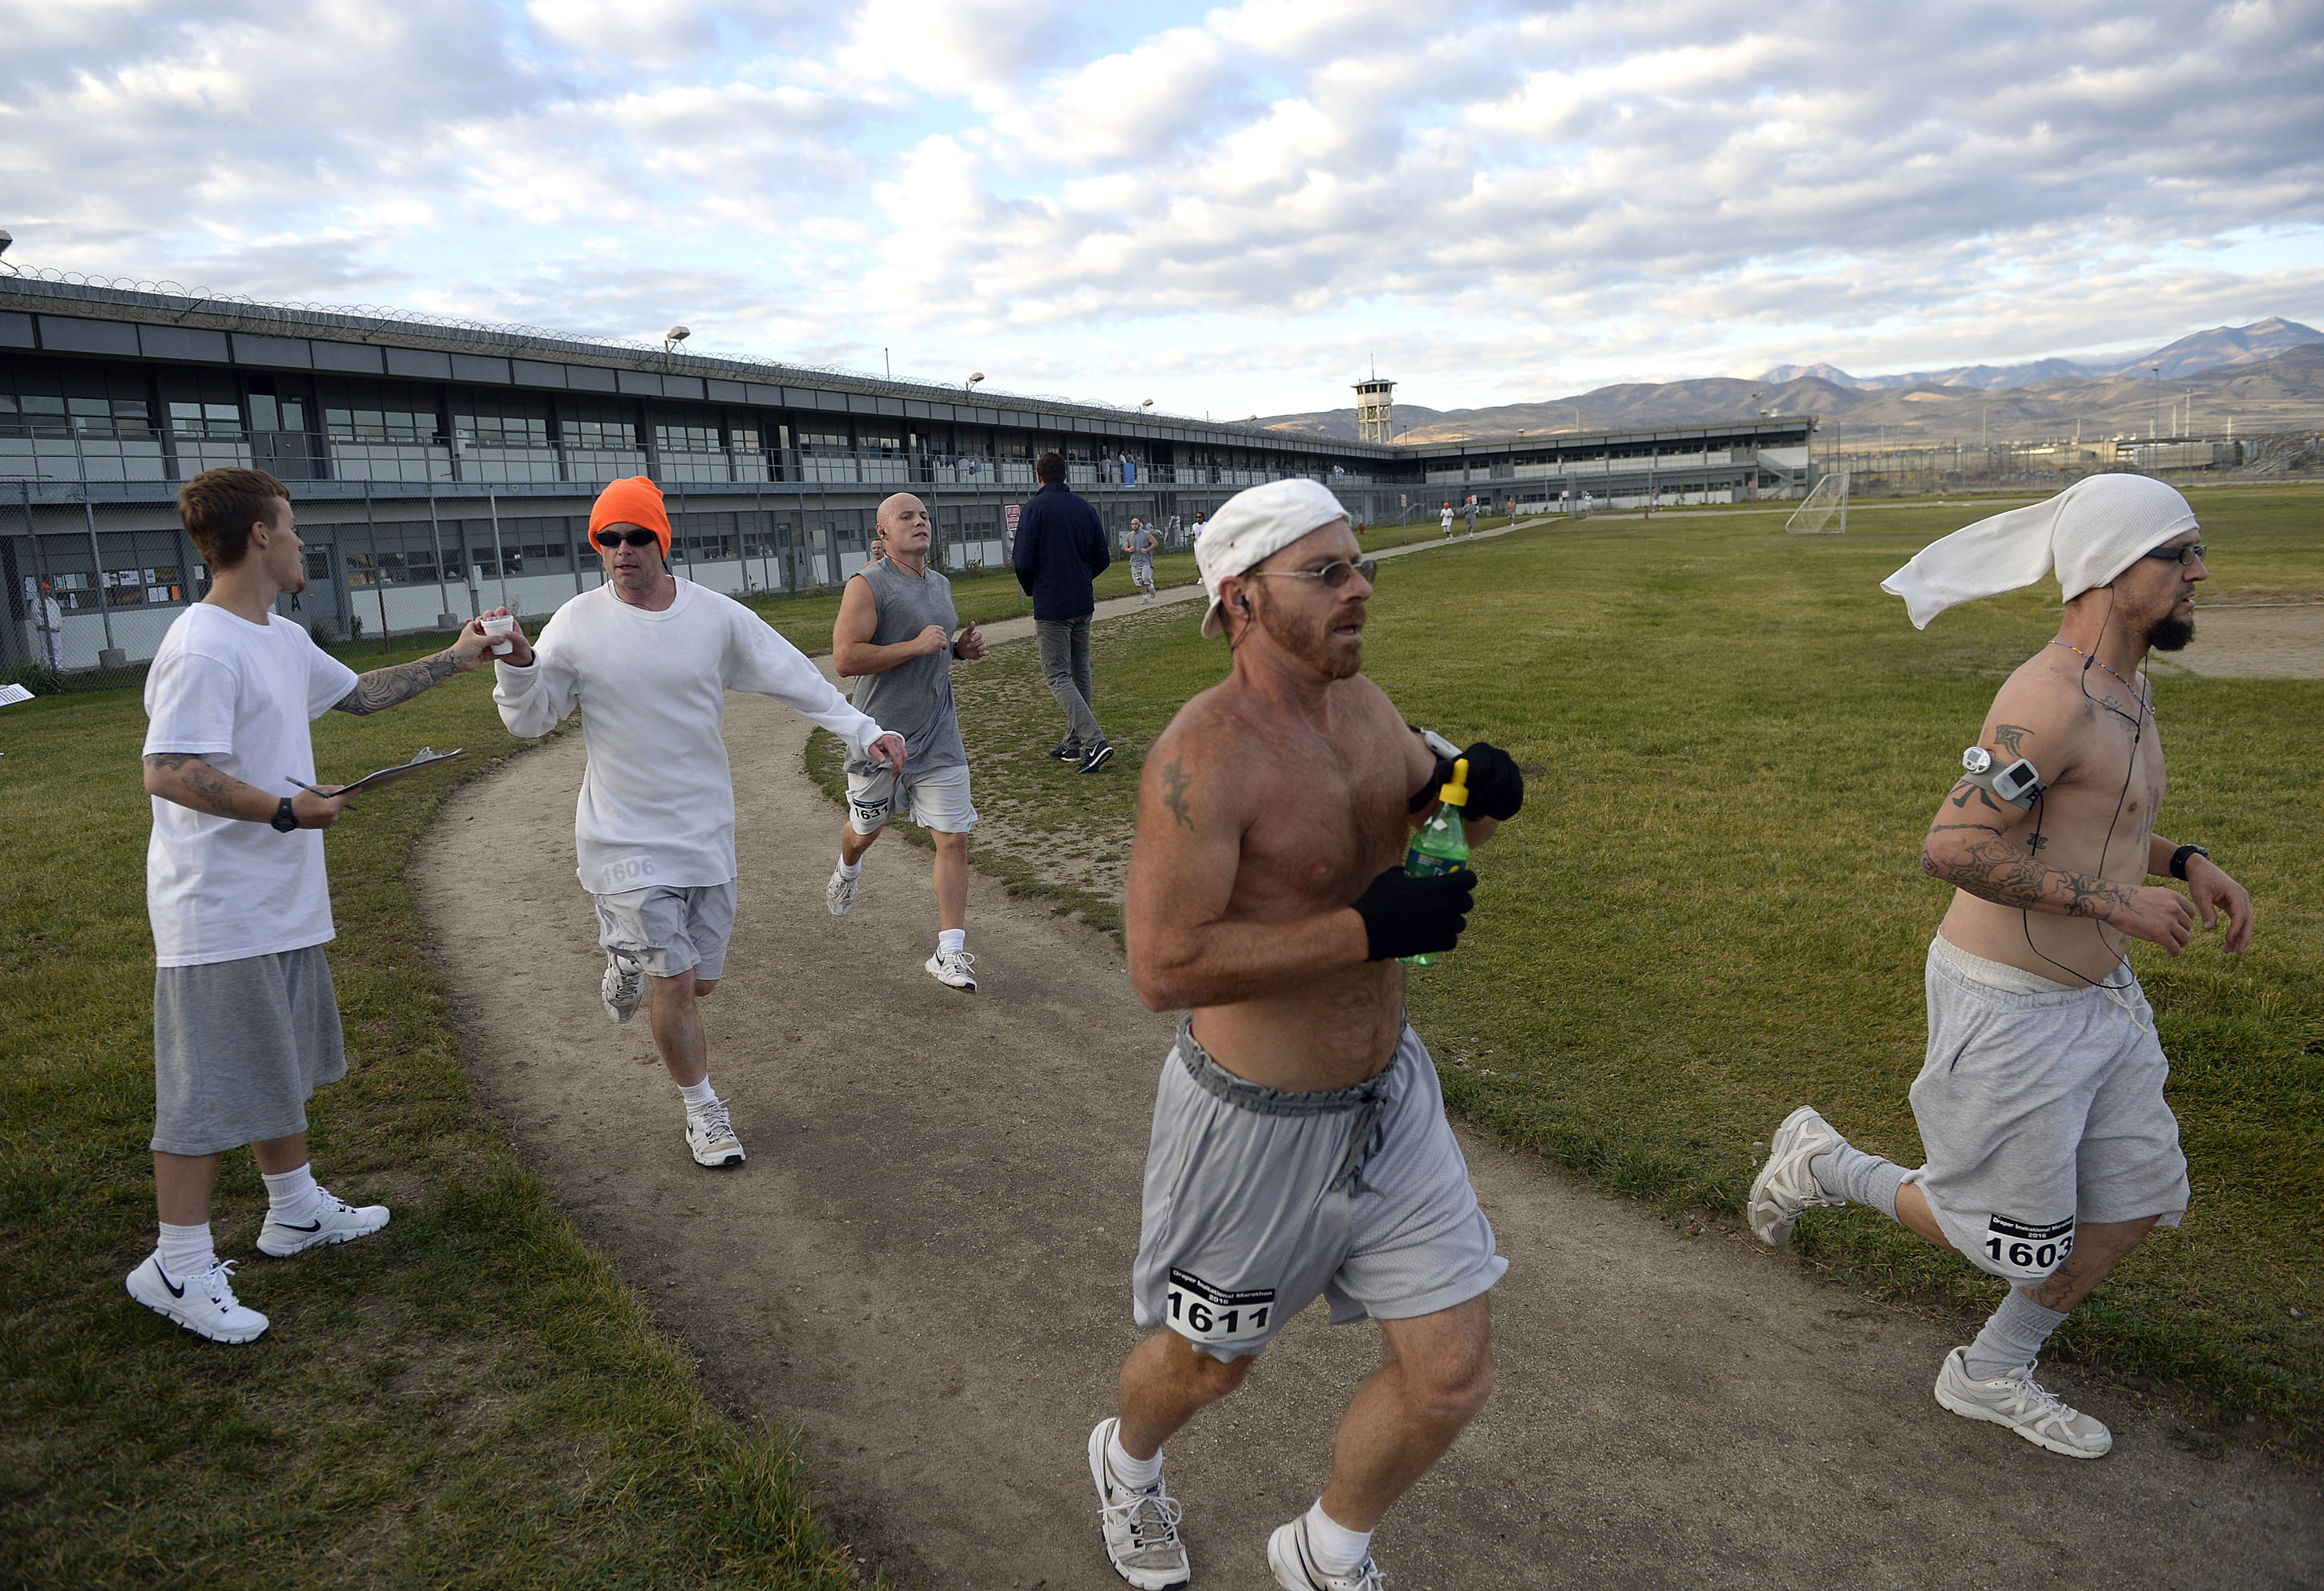 Inmates at the Utah State Prison in Draper, Utah, run the enclosed exercise yard-track at the start of the Draper Invitational Marathon, Half-Marathon and 10K races Tuesday, Oct. 25 2016. A group of frontrunners grab some water and stick together for the first part of the race. Full marathon runners will run 110 laps around the track. (Al Hartmann/Salt Lake Tribune via AP)